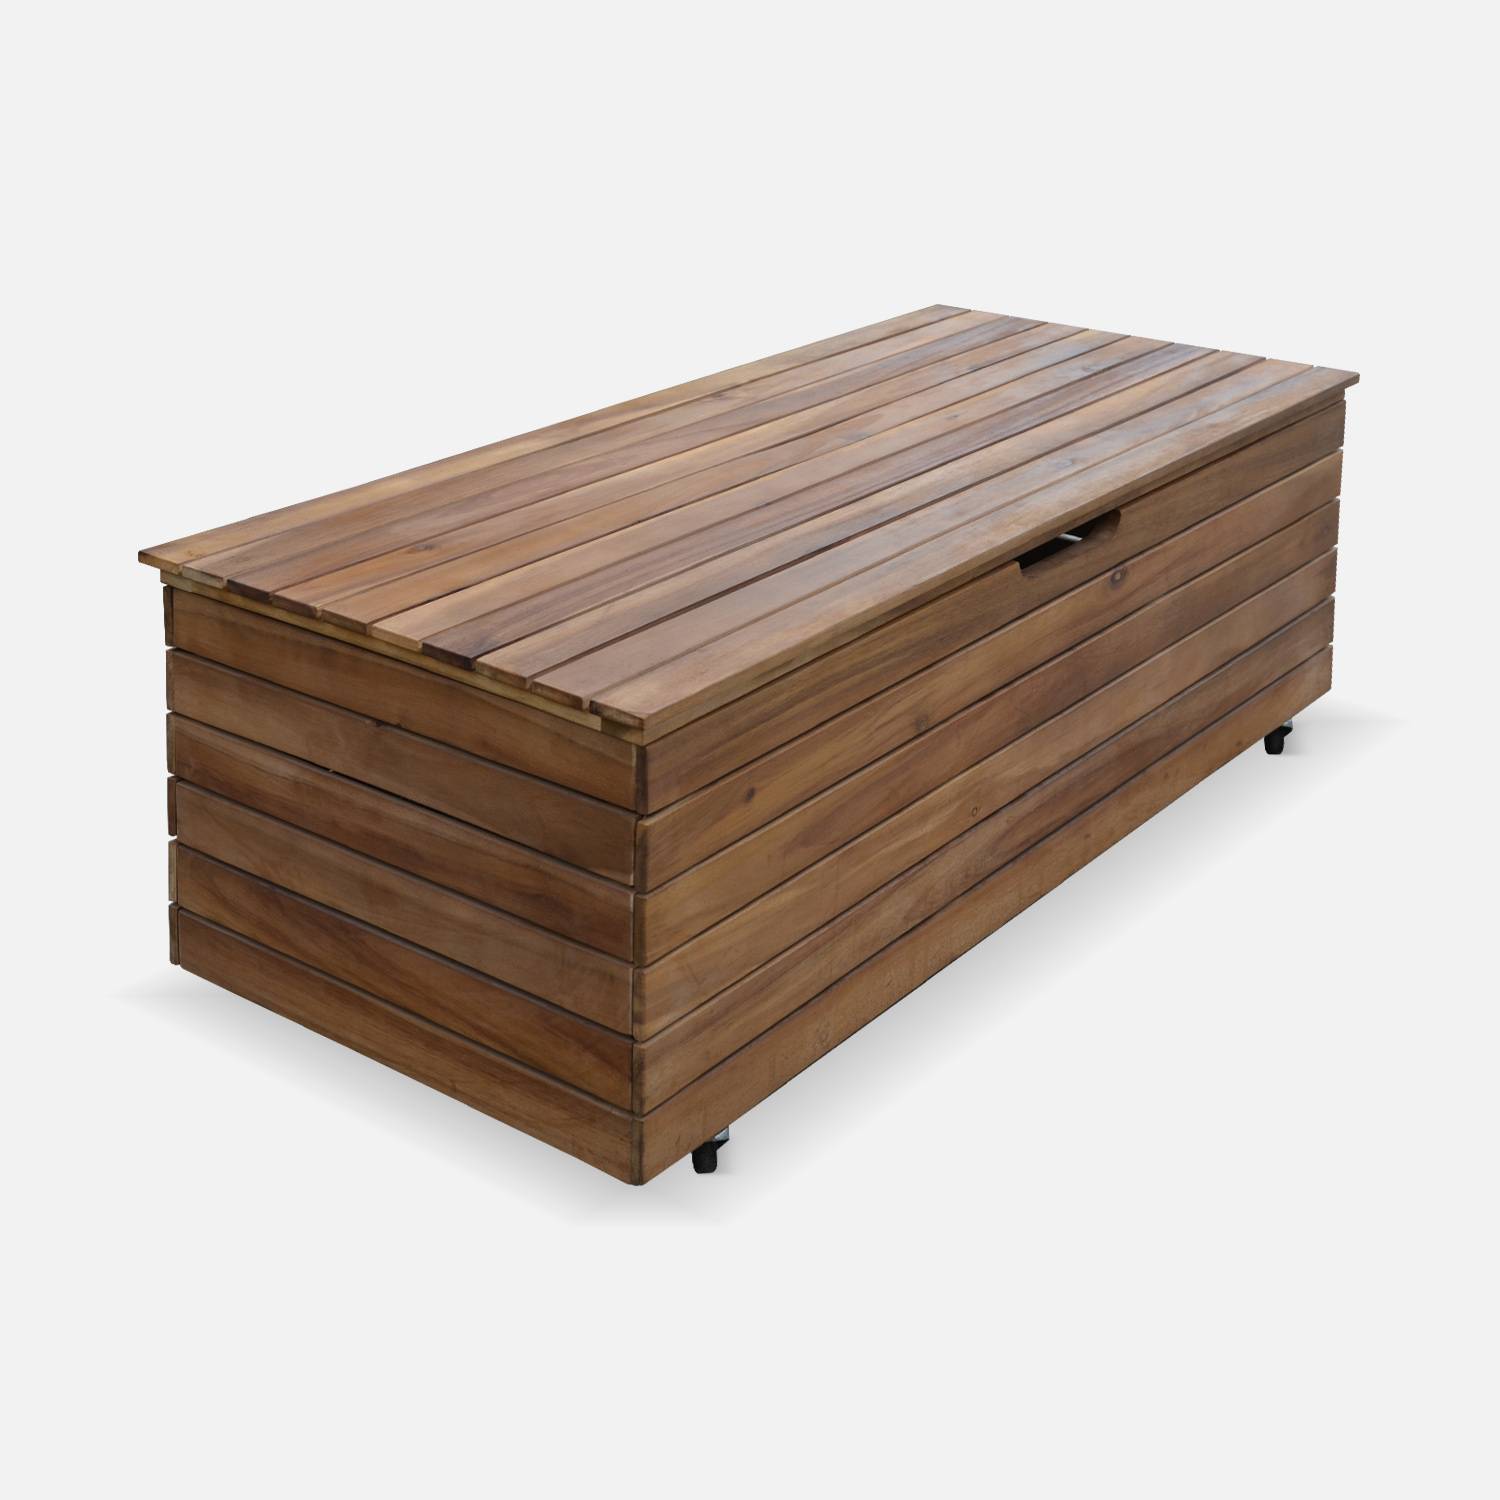 Garden storage box in wood - Saragosse - 110L, cushion storage, 107x48.5cm with hydraulic lift opening and casters Photo3